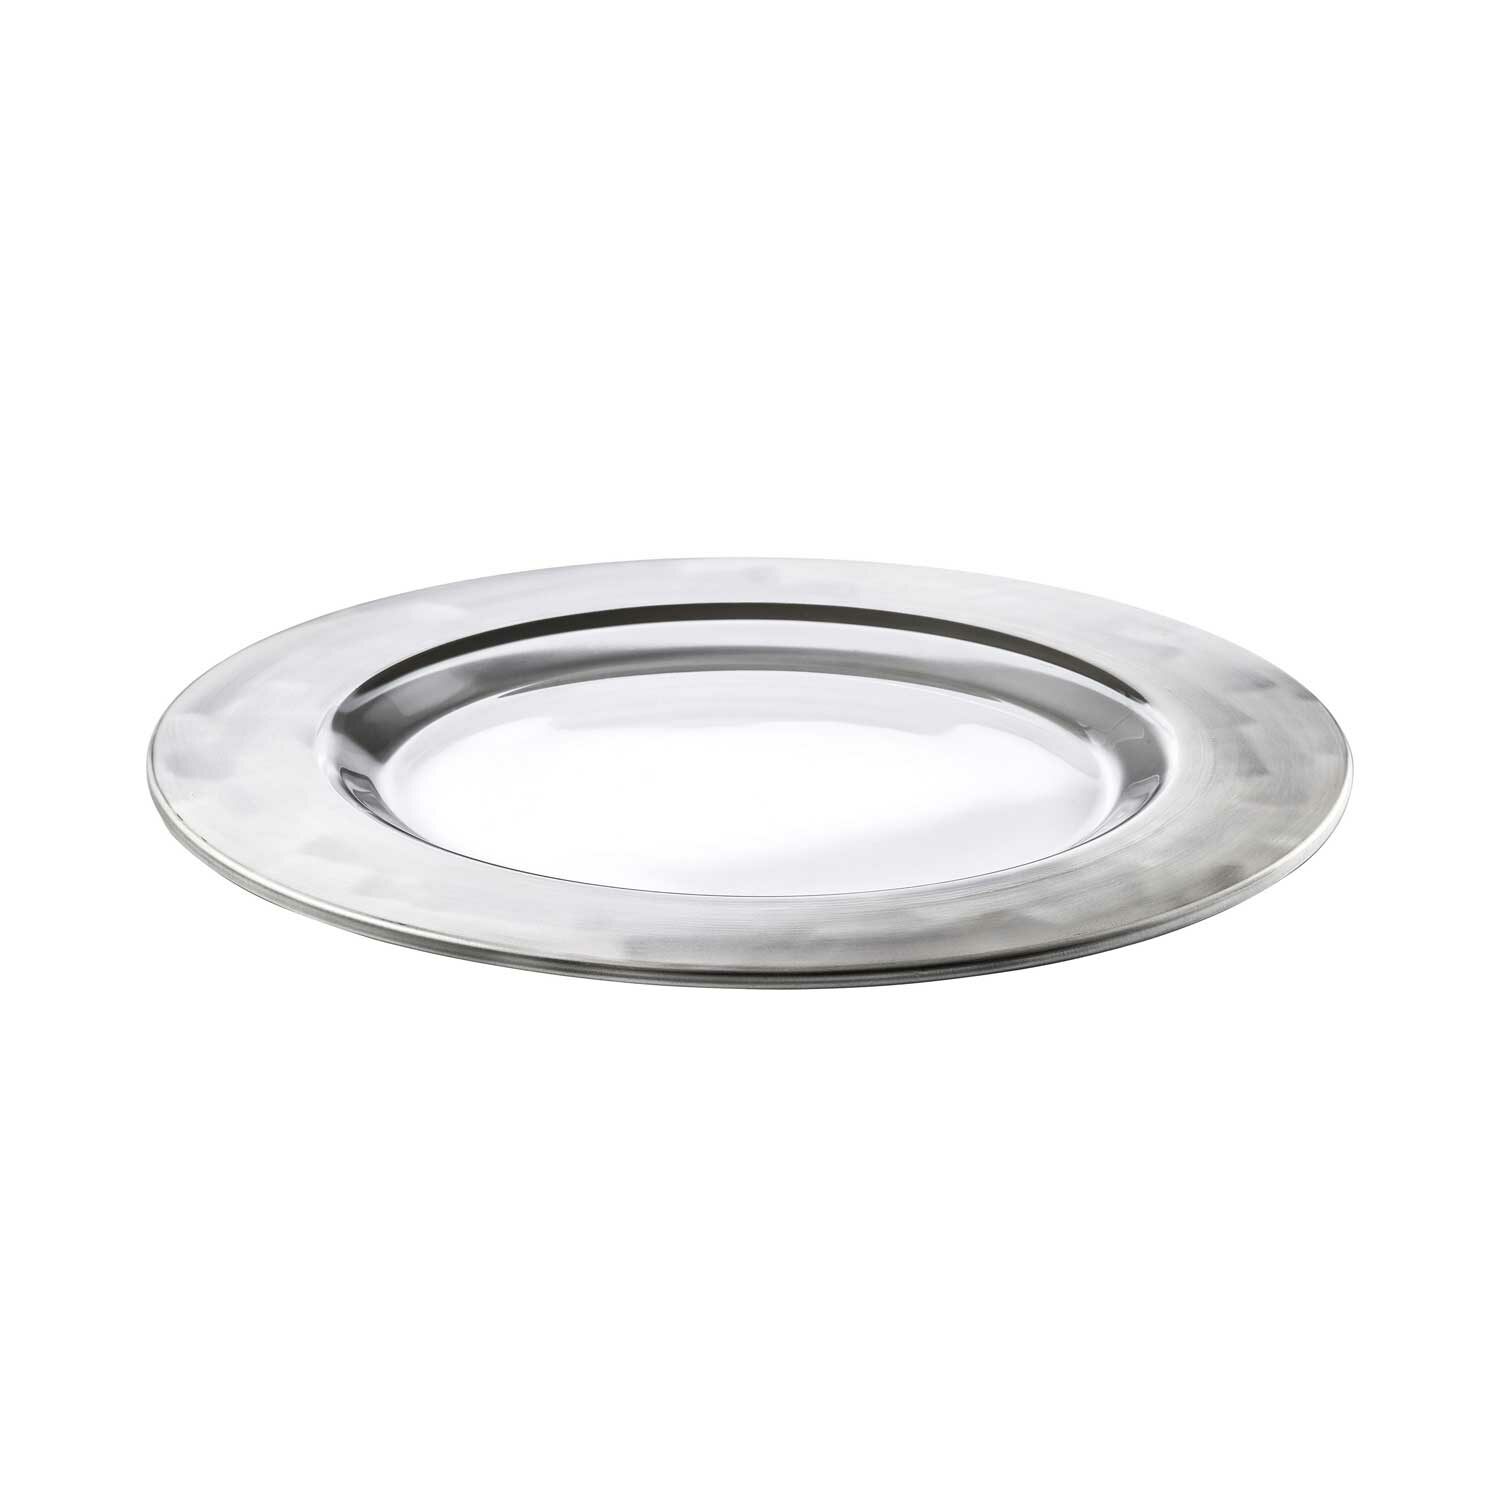 PURO crystal glass plate 28 cm with real silver